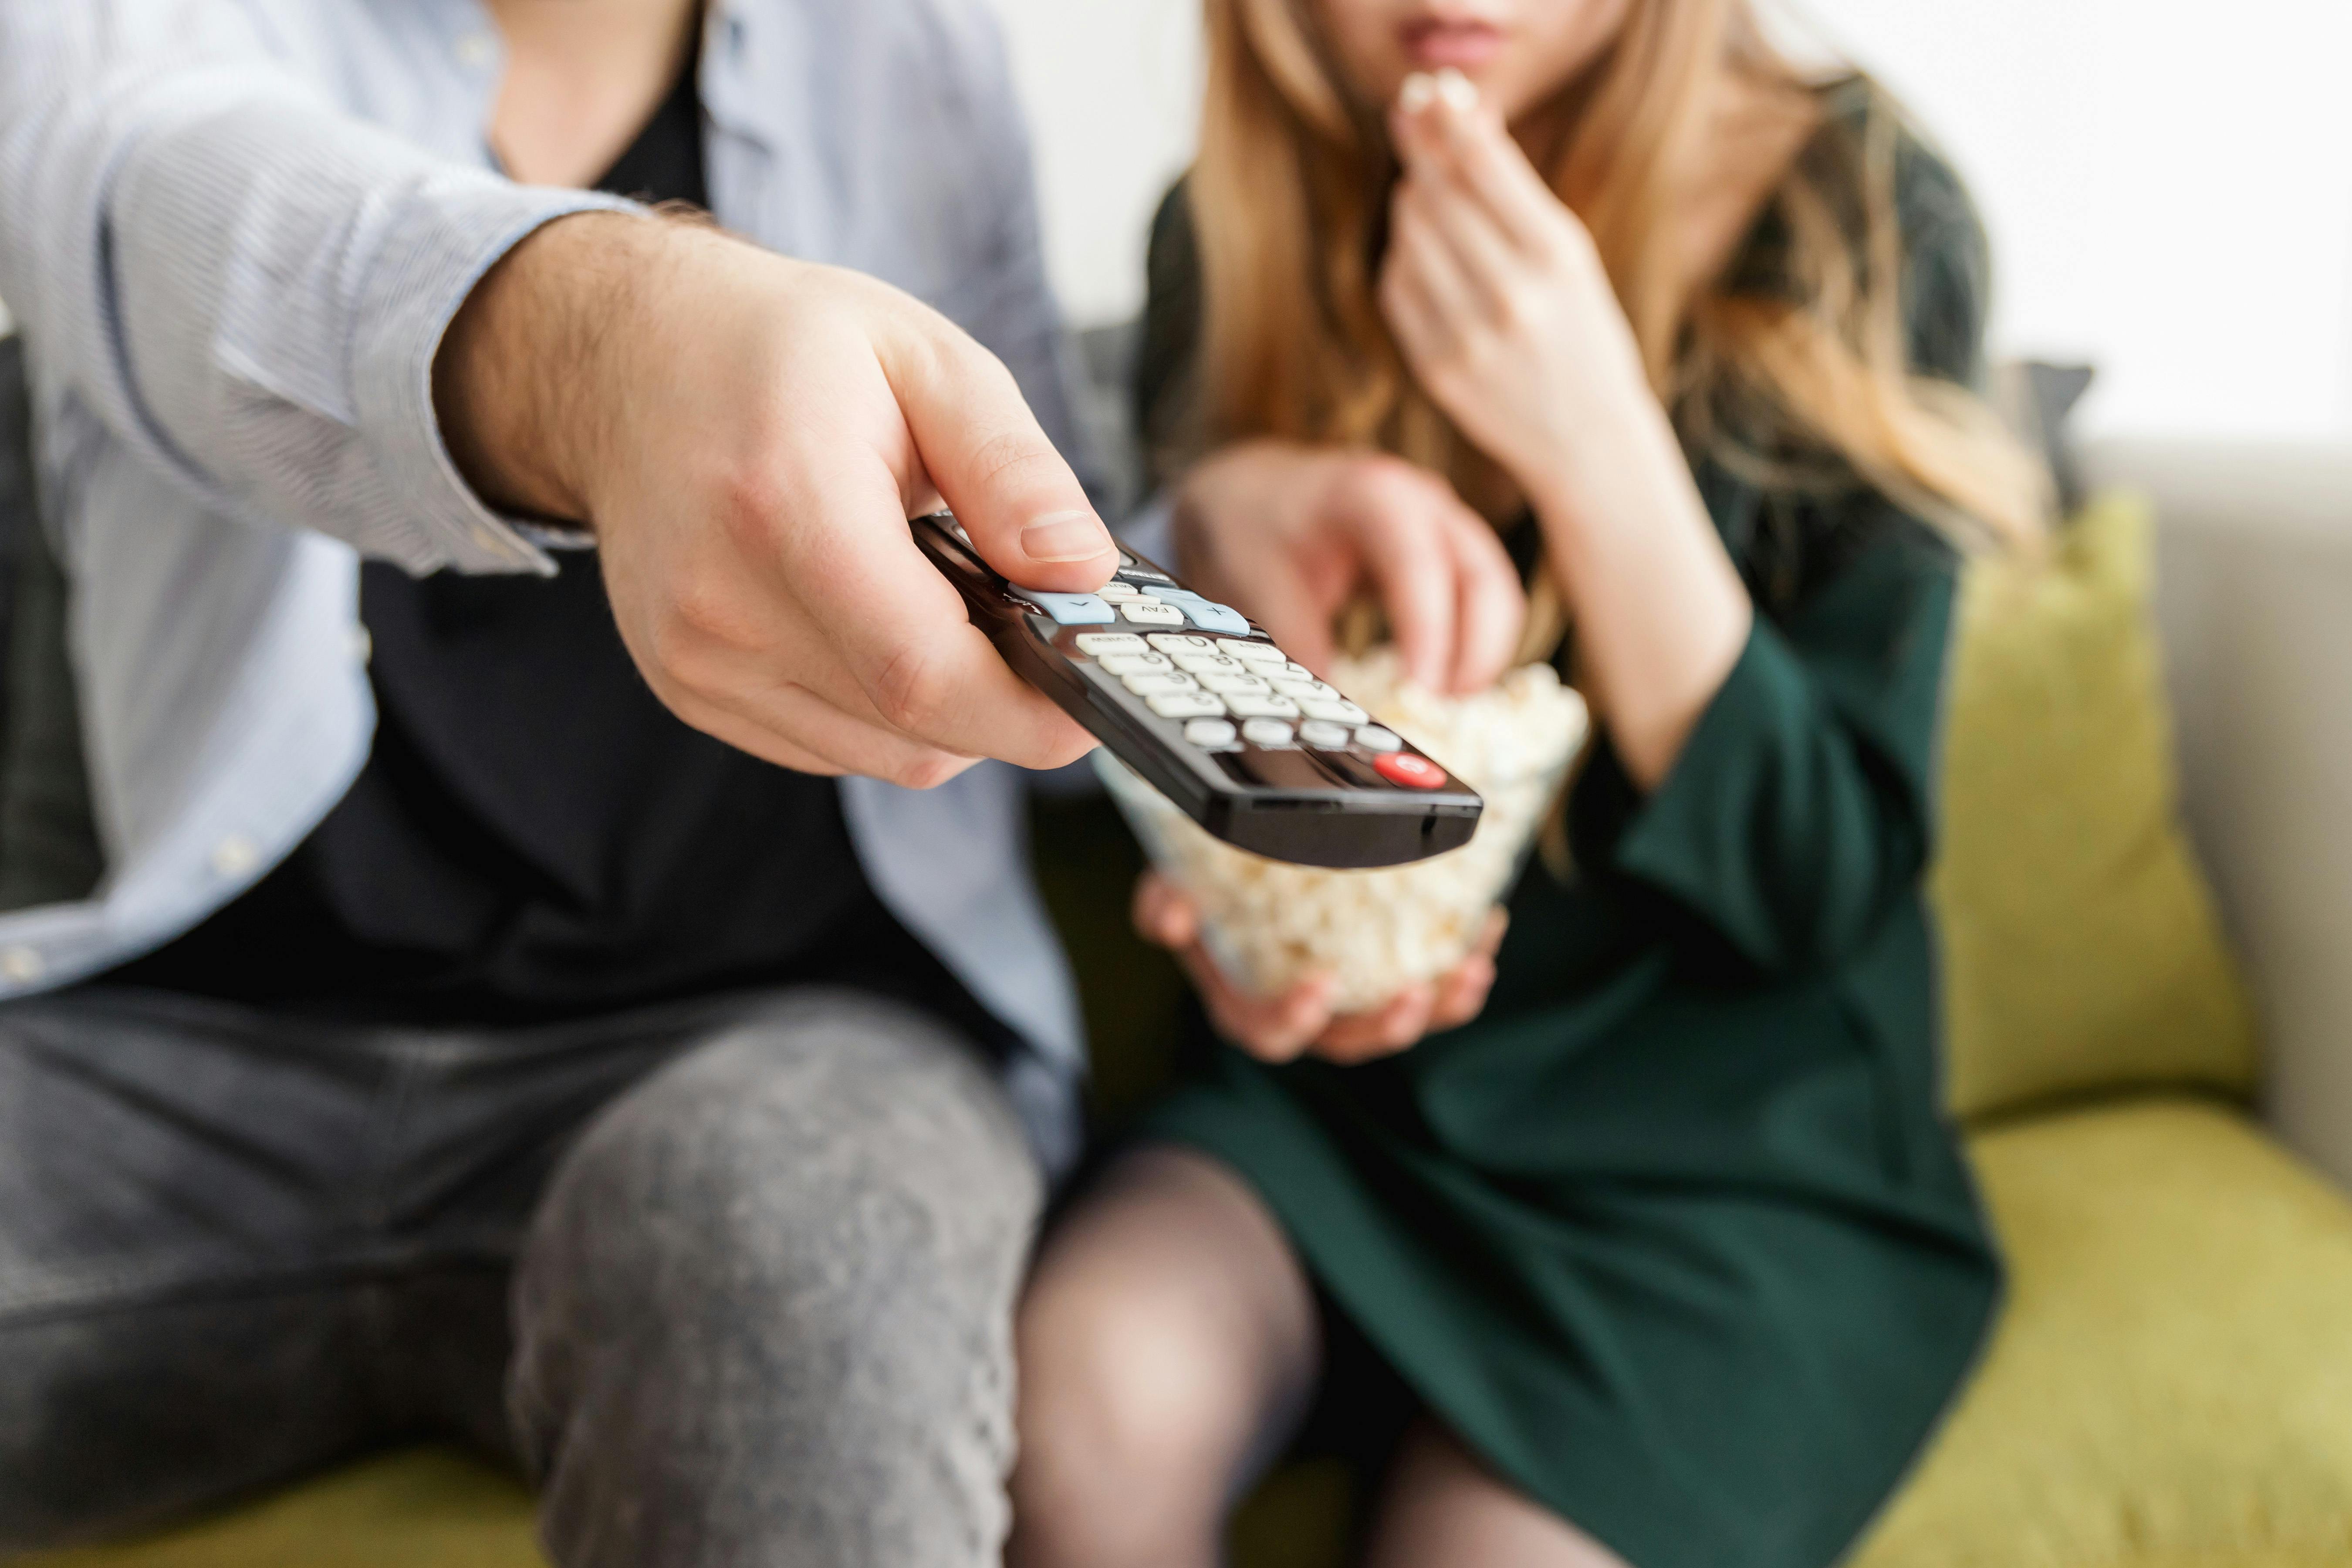 A man holding a remote | Source: Pexels